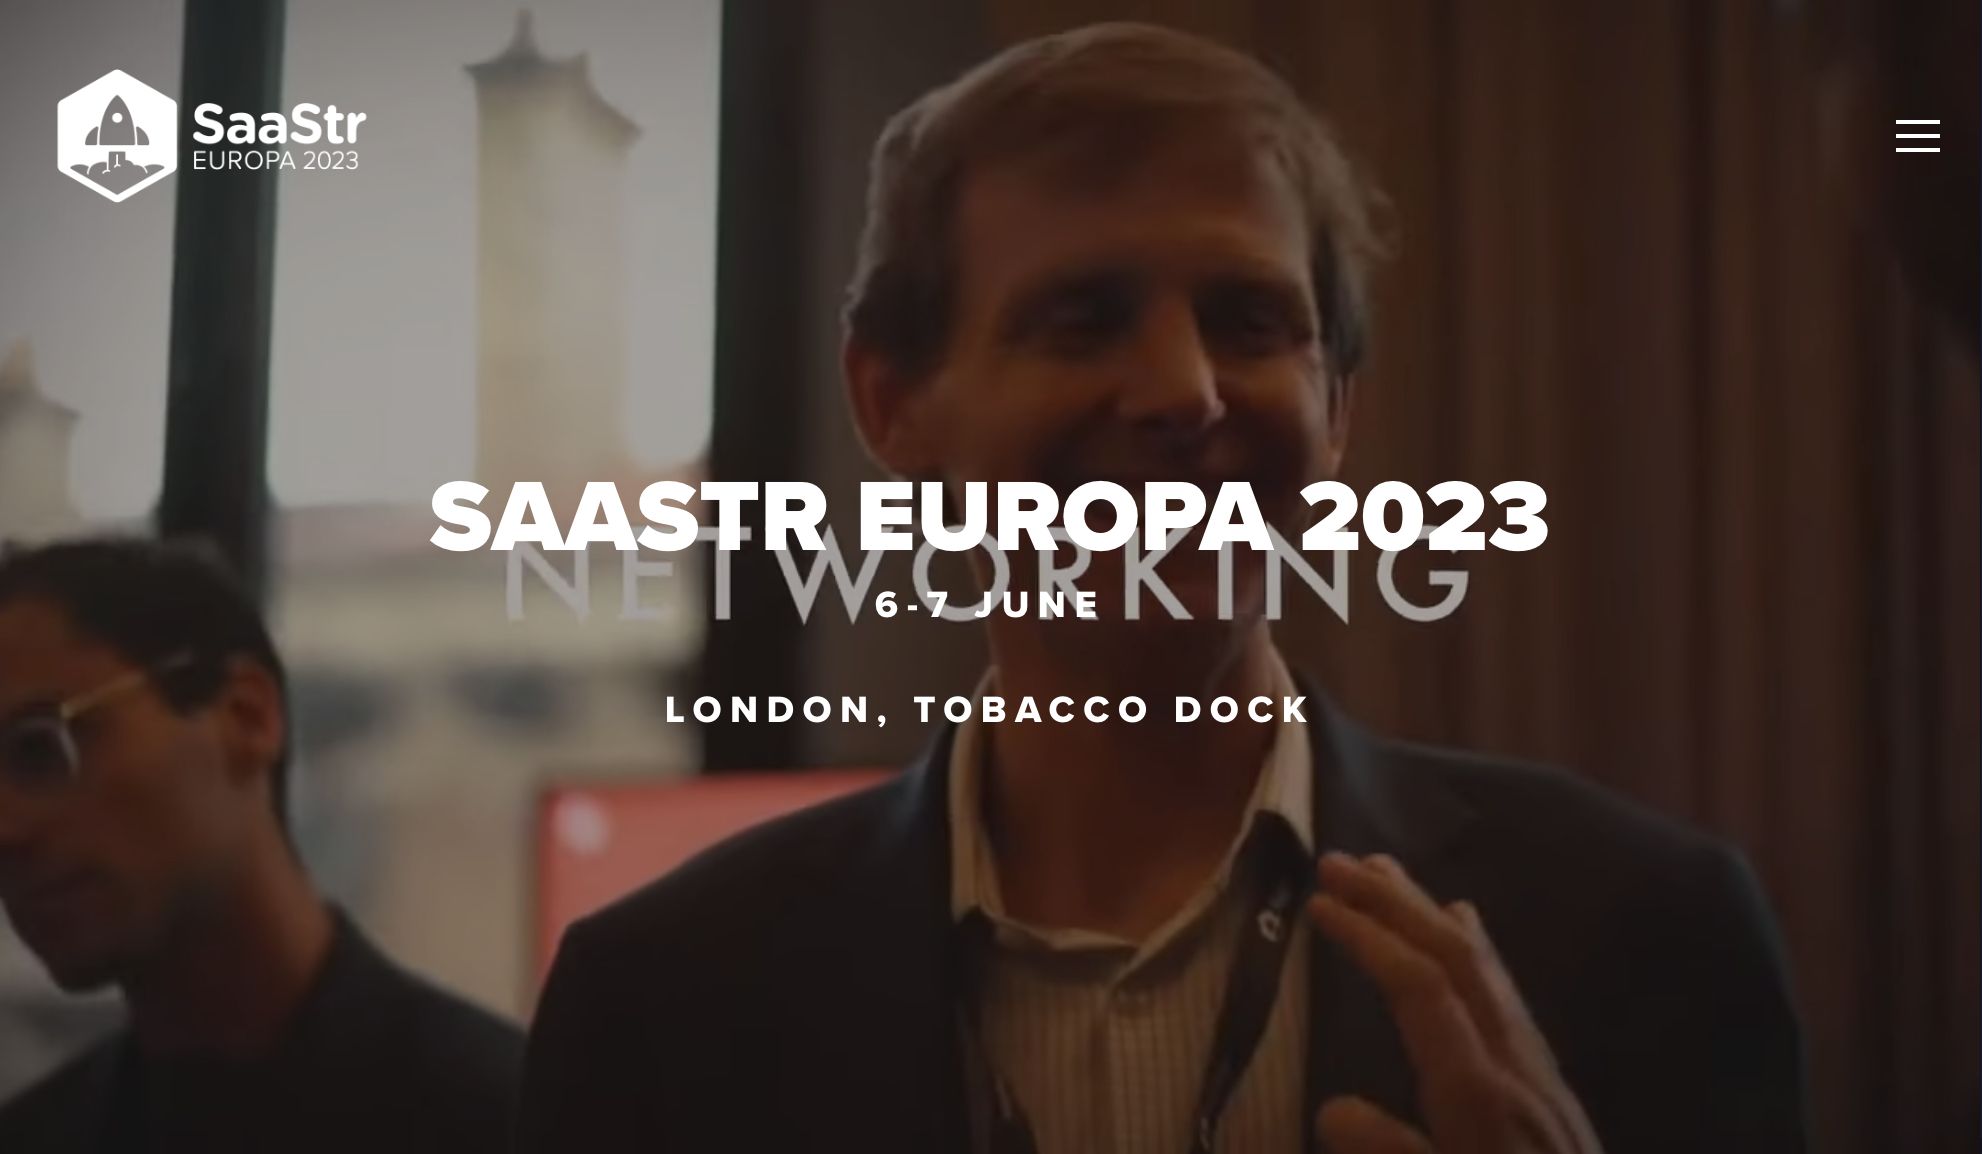 Sales event worth visiting in 2023: SaaStr Europa 2023